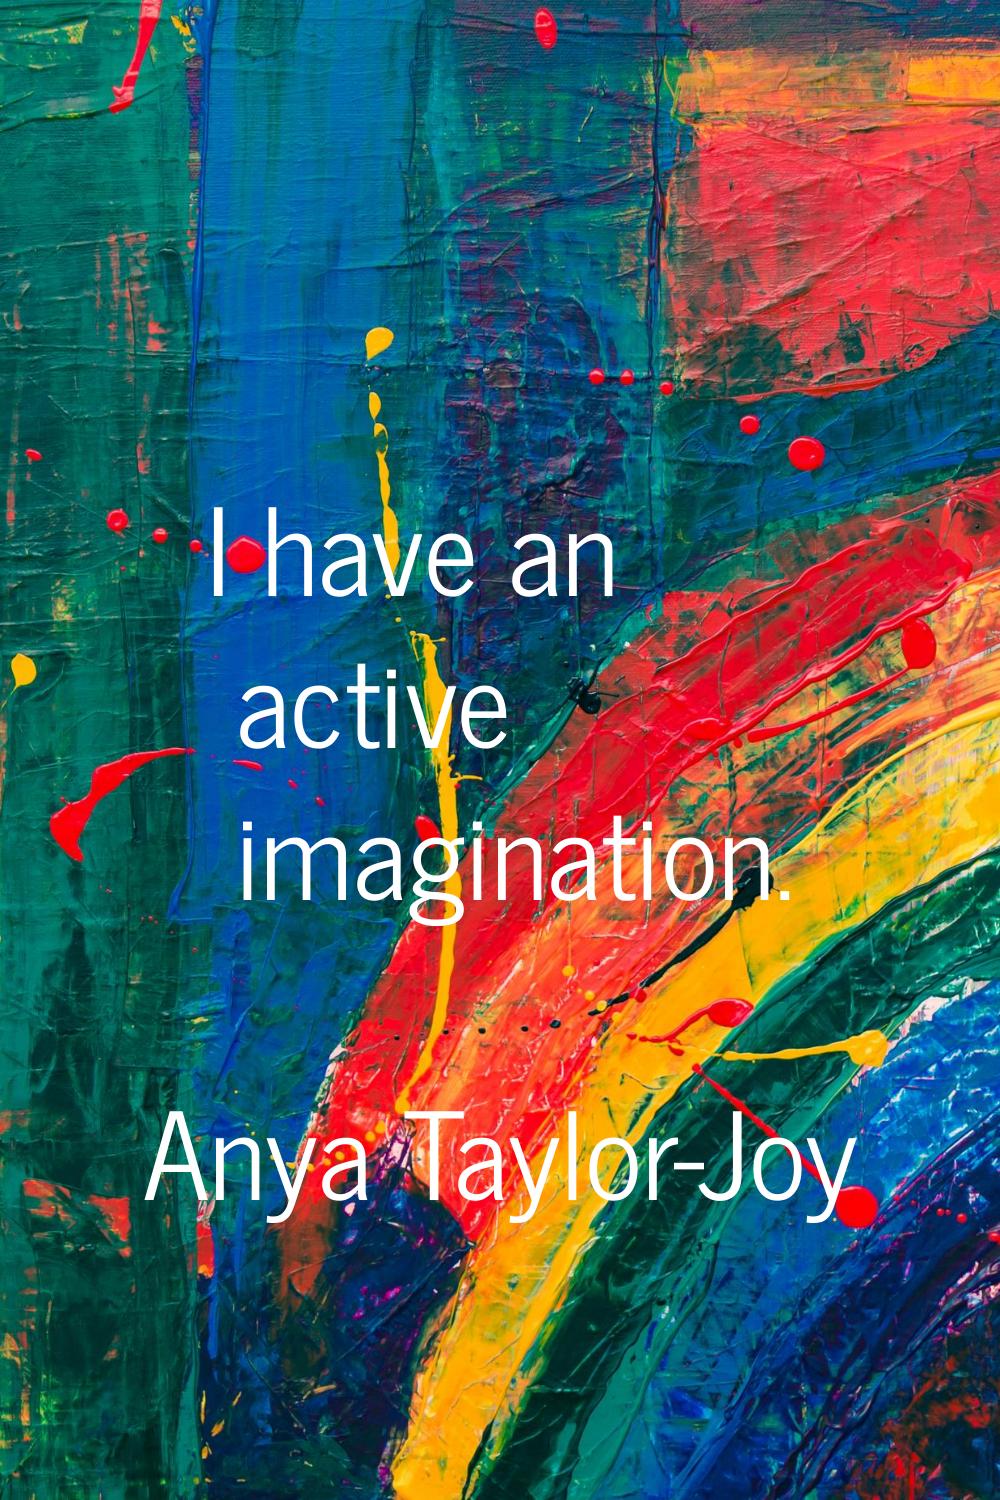 I have an active imagination.